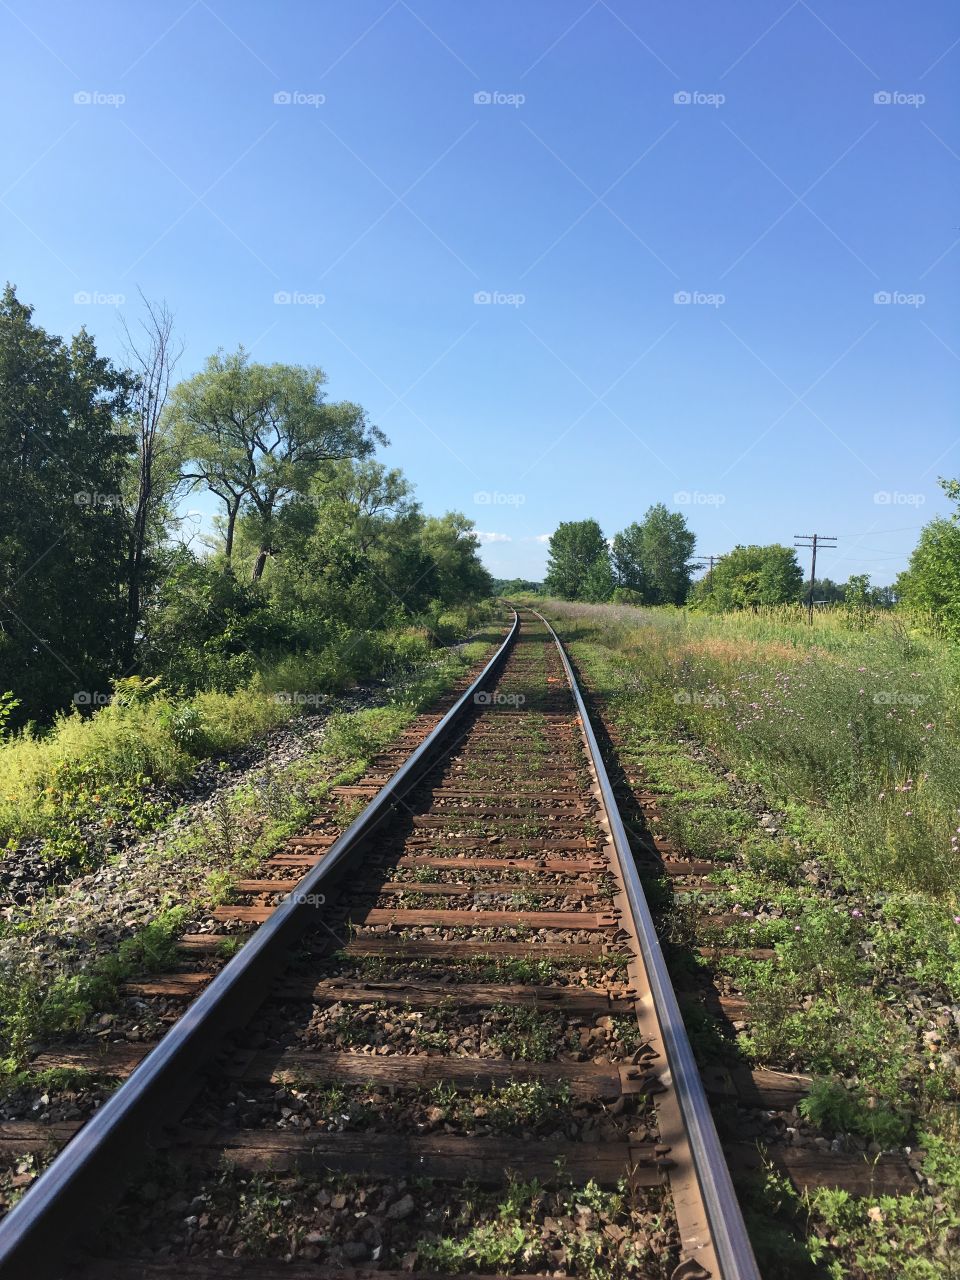 Railroad across the countryside 